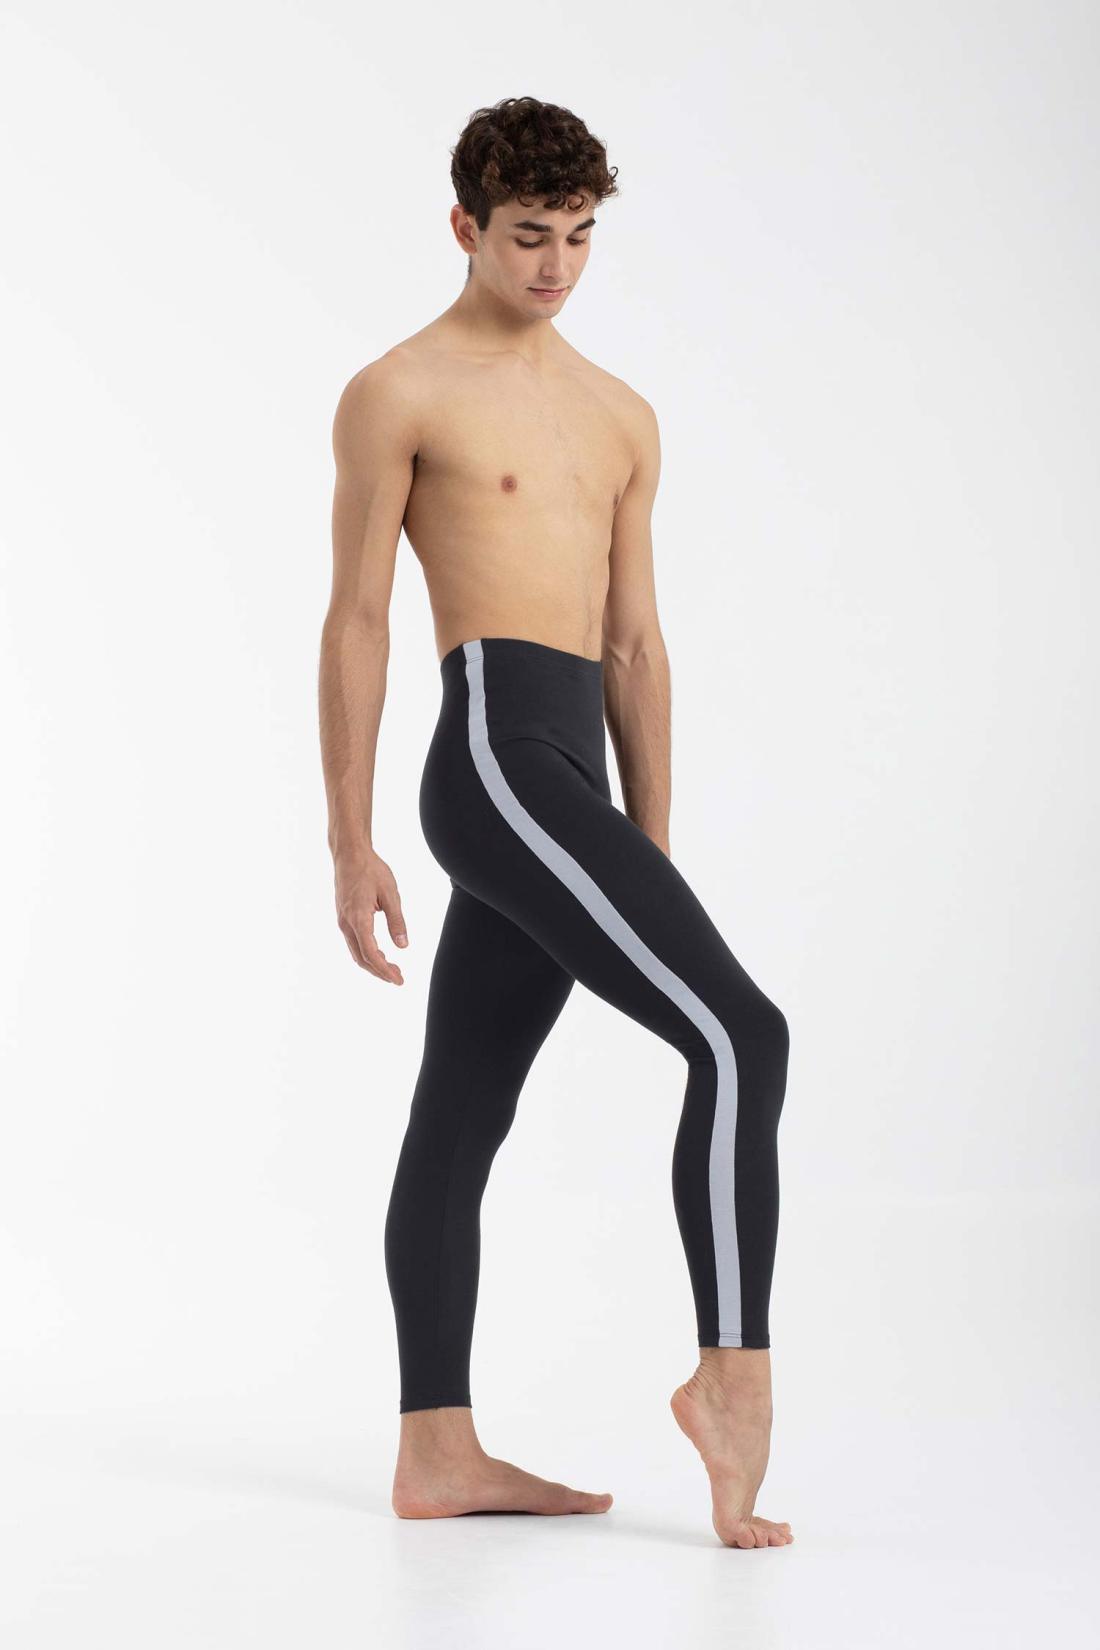 Men's Footless Tights with stripe on the sides for Male Dancers in Organic Cotton Intermezzo Ballet Dance